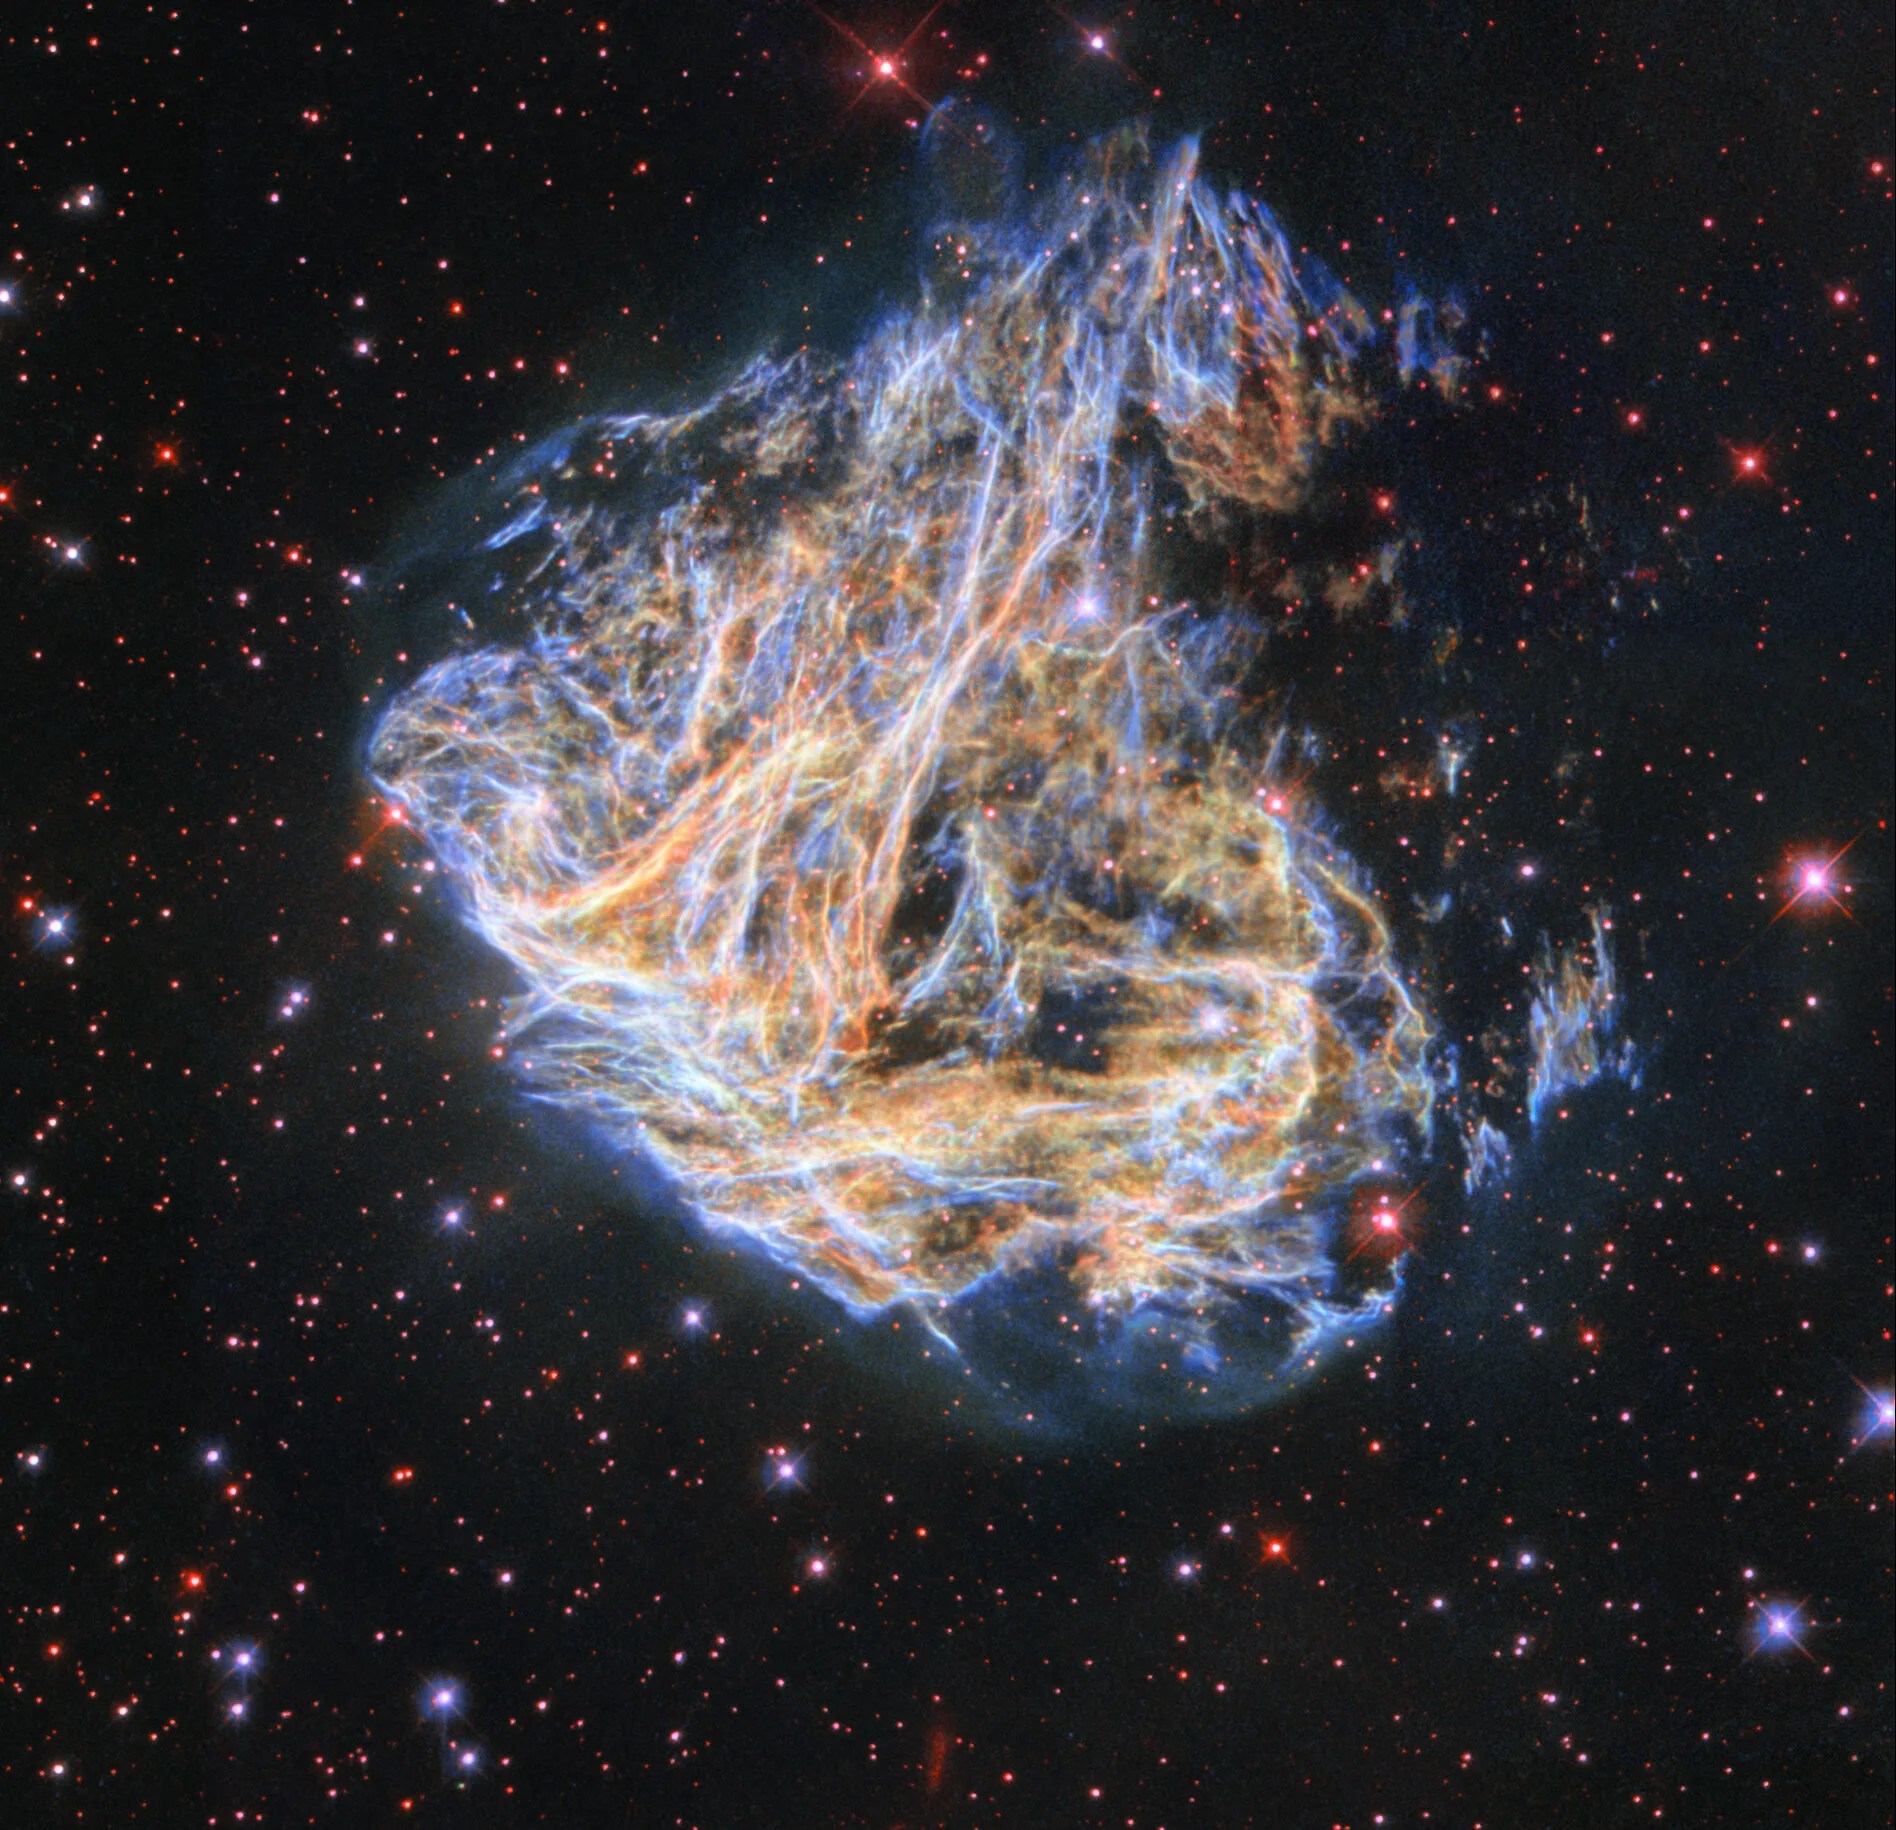 Center-top: supernova remnant in the shape of a flame, many long strands and thin layers of gas that glow orange and blue. faint gas clouds outline its edges. several scattered blue and red stars surround it. the background is black with small red stars.